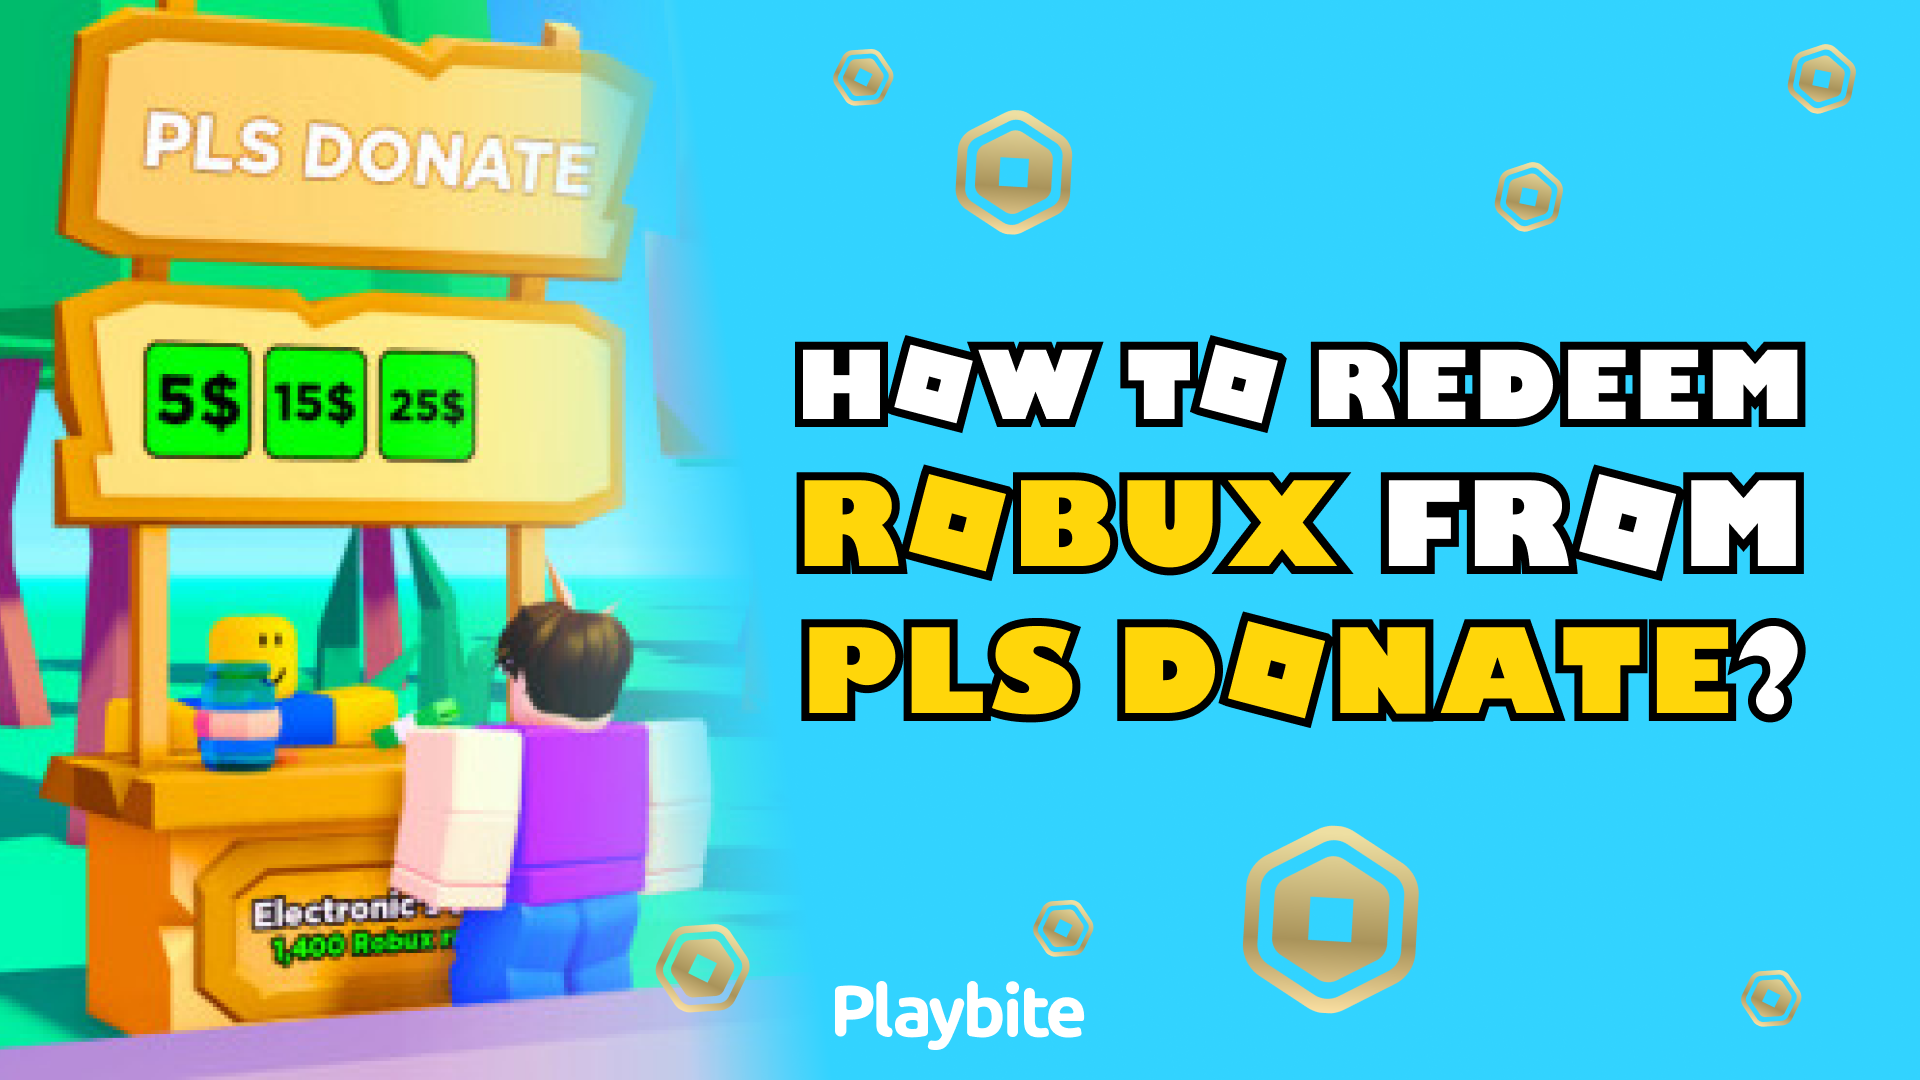 This robux update is good, but it needs improvements (ROBLOX) 